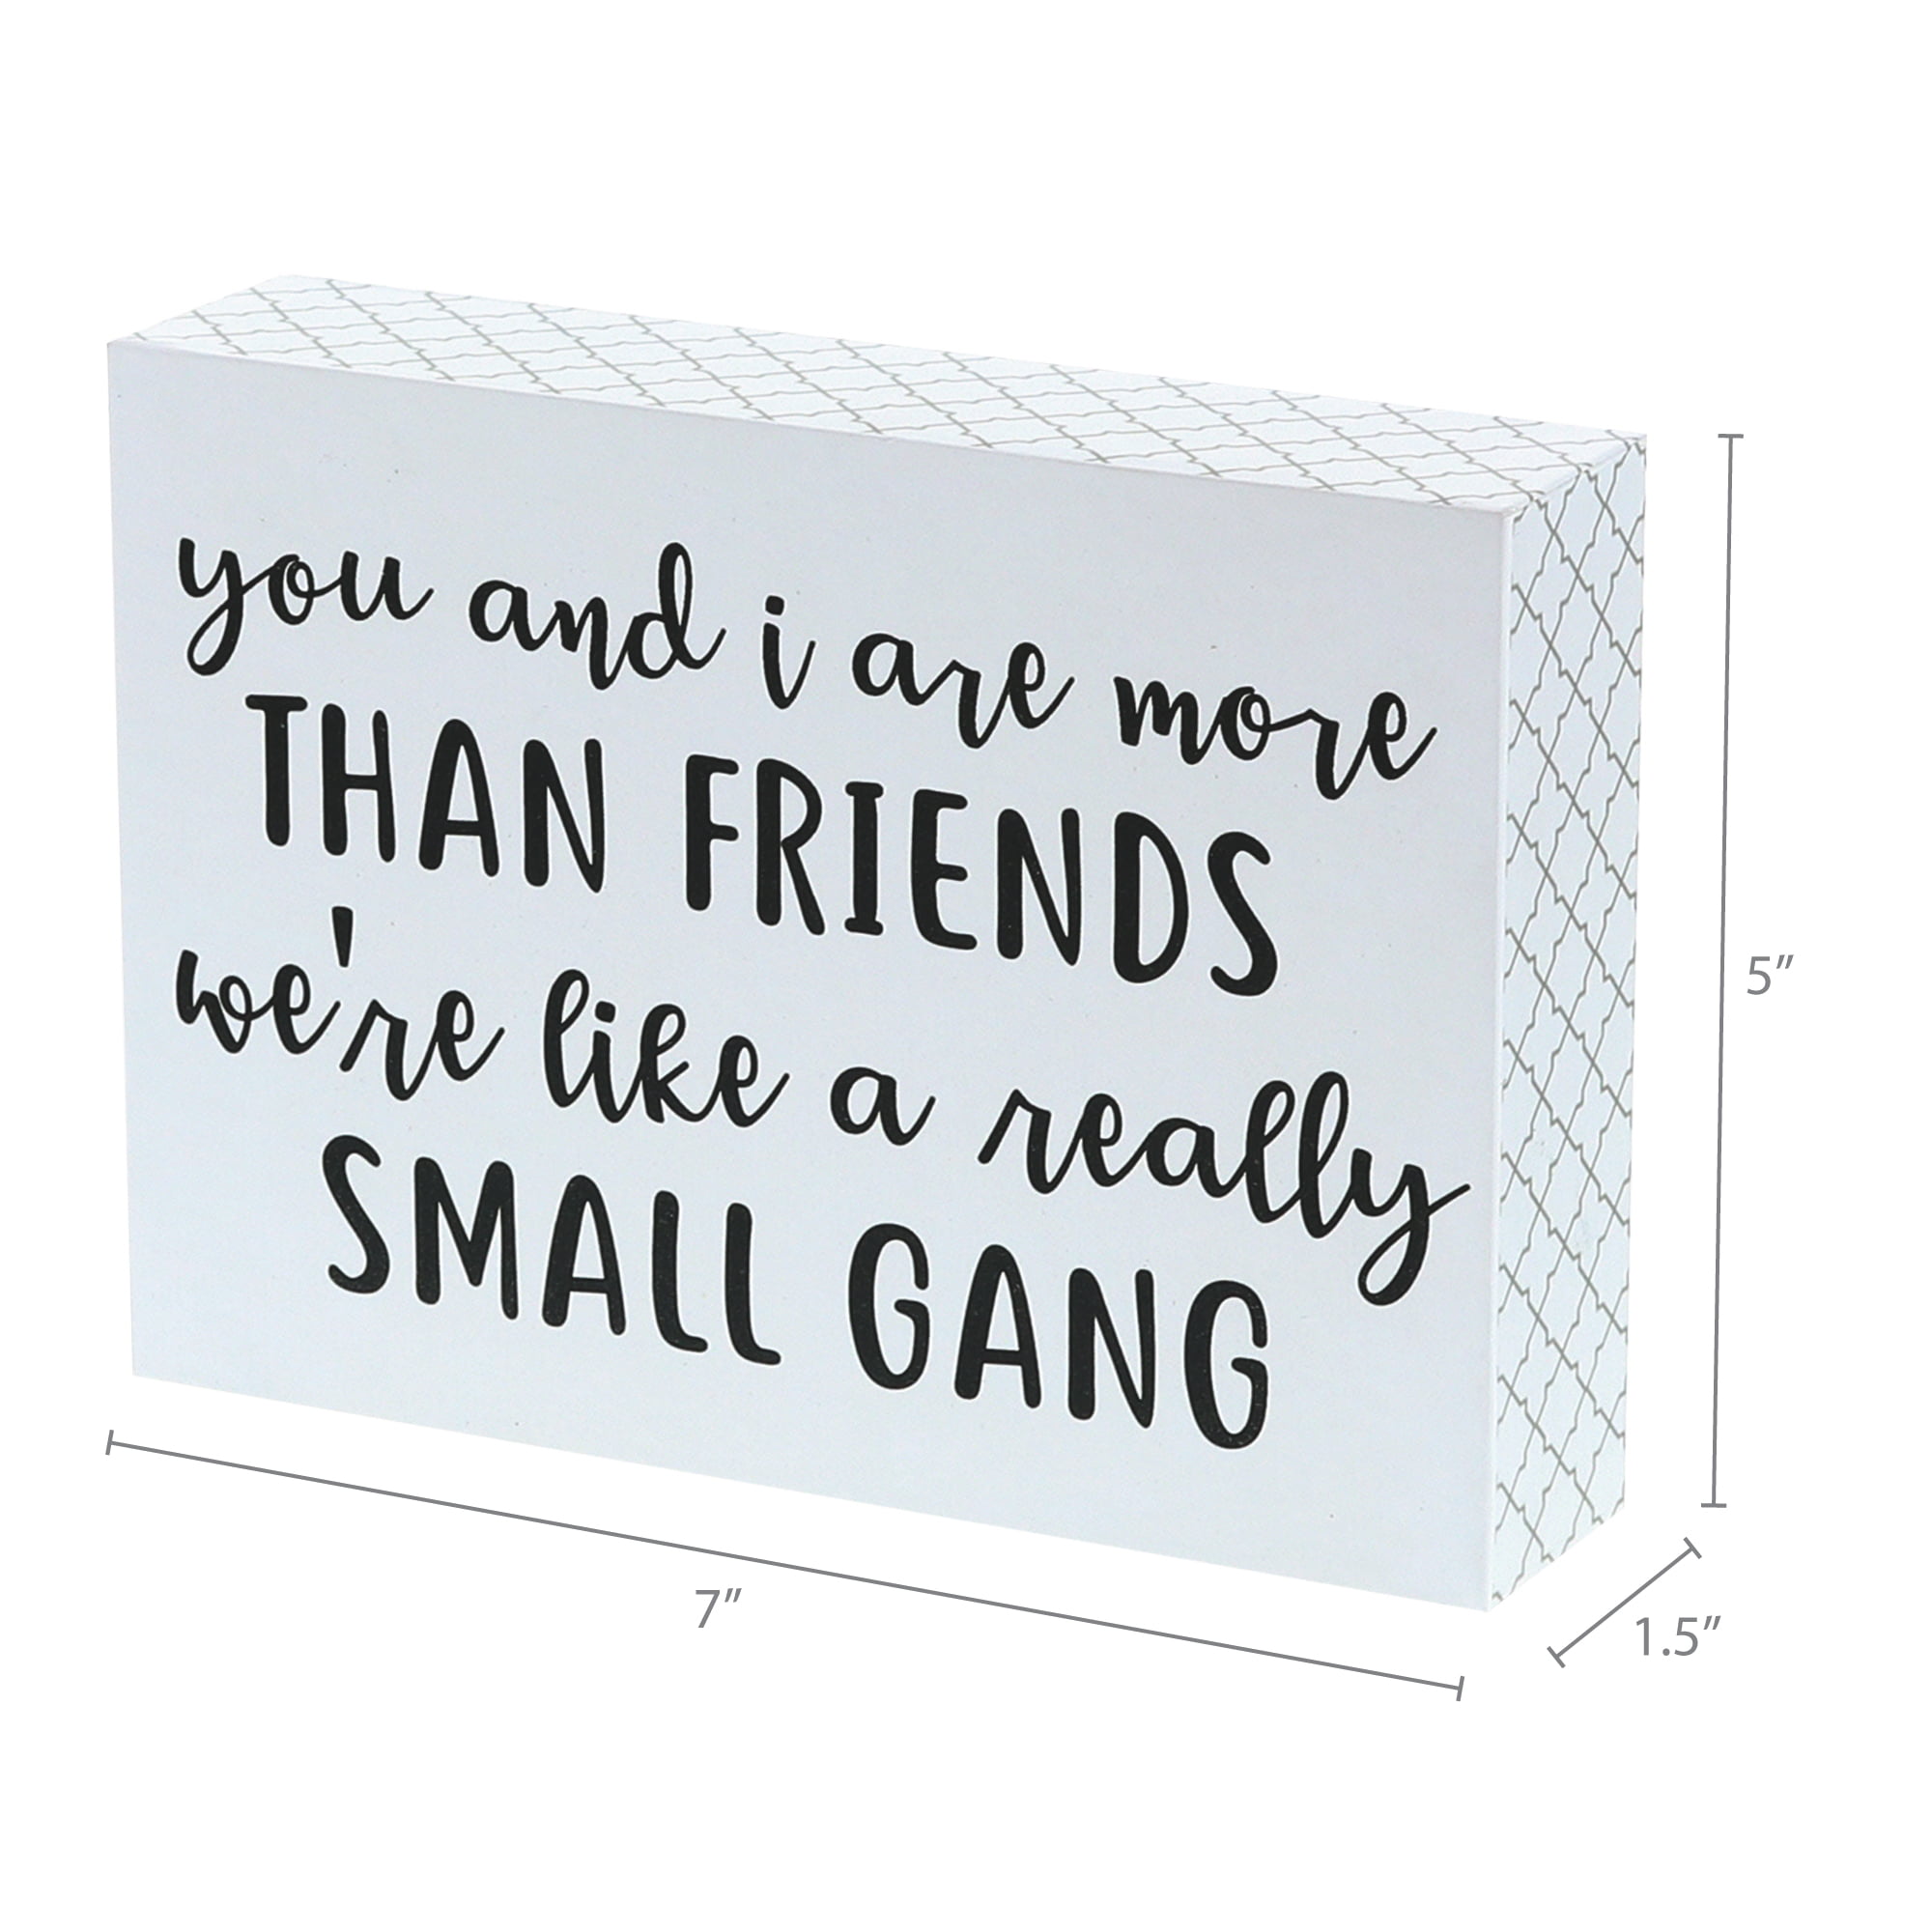 A Really Small Gang Friends Metal Wall Sign Plaque Cute Girly Floral Ornate 